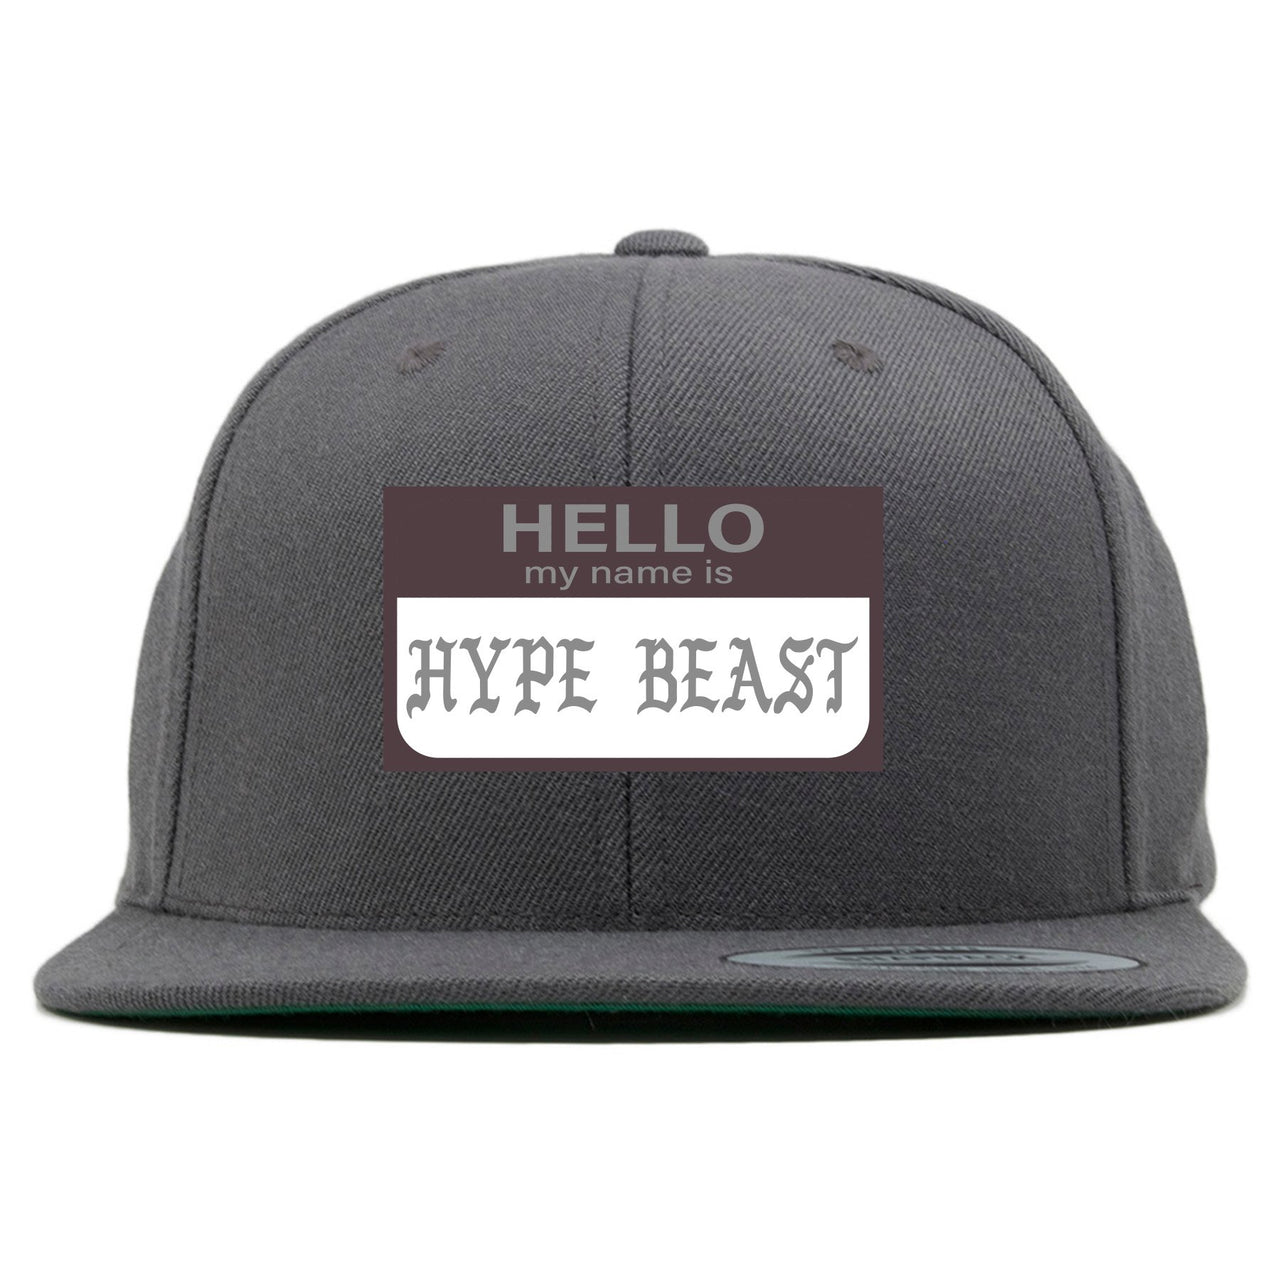 Geode 700s Snapback | Hello My Name Is Hype Beast Pablo, Gray